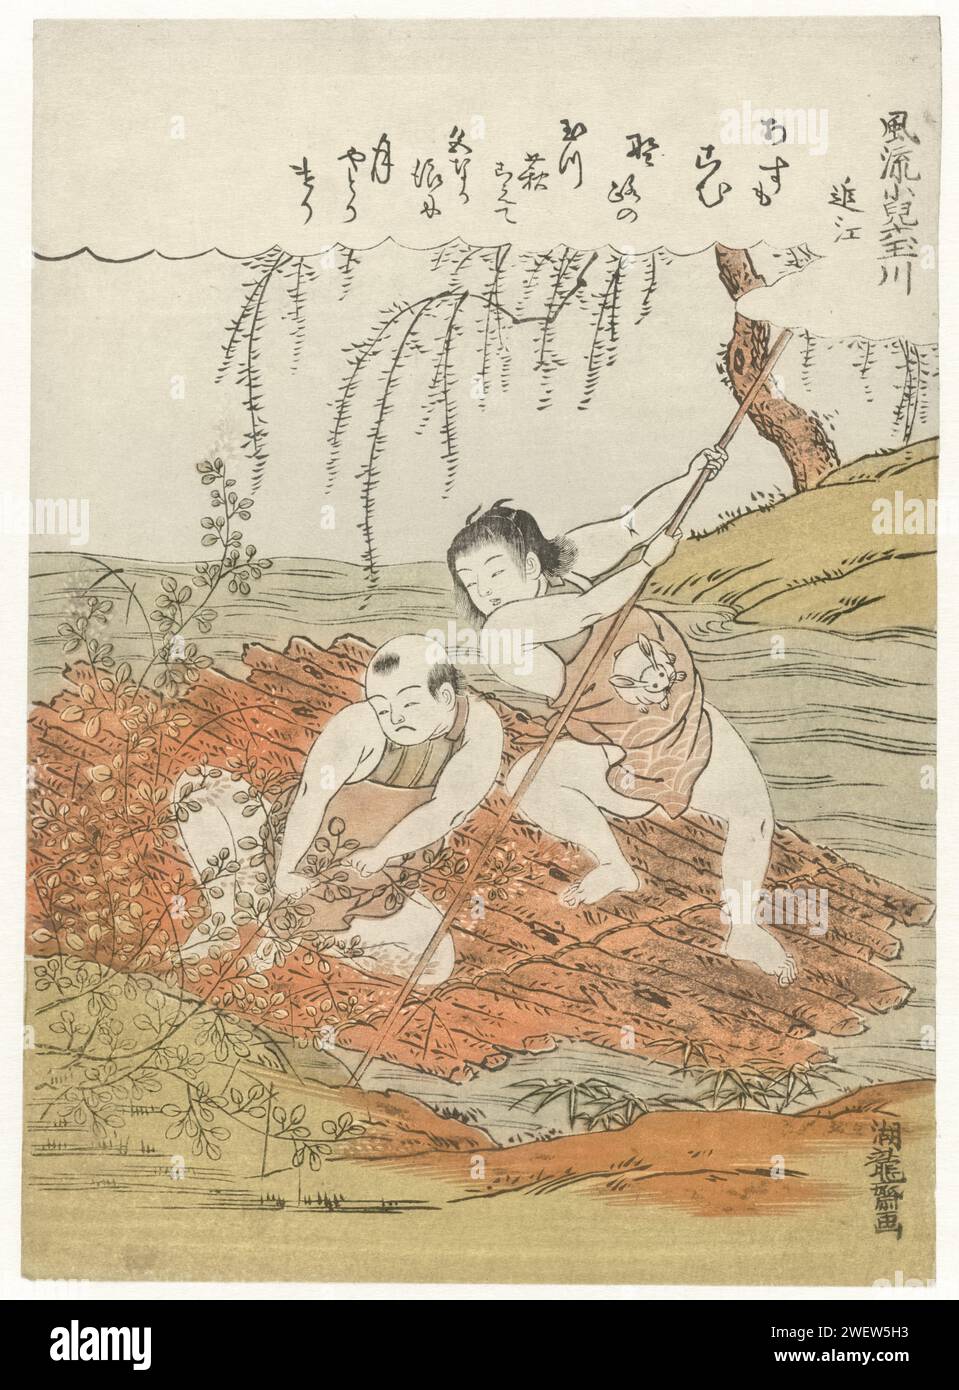 Two boys gather Hagi (branches with leaf) from a raft on a river, Isoda Kôryûsai, c. 1771 print The boy who pushes it smoothly wears a shirt with a hare on it (reference to the hare). From the series 'Small children on the six' 'crystals' 'rivers'. Inscription is a poem by Minamoto No Toshiyori: the moon, shining over the teaching speza, came to life in the colorful waves of the crystal clear river Noji, as if, the morning would never come. Minamoto No Toshiyori, the Noji No Tamagawa is one of the 'six crystal clear rivers'. 'Hagi' is Lespedeza, a Japanese clover, the bush that the boys attrac Stock Photo